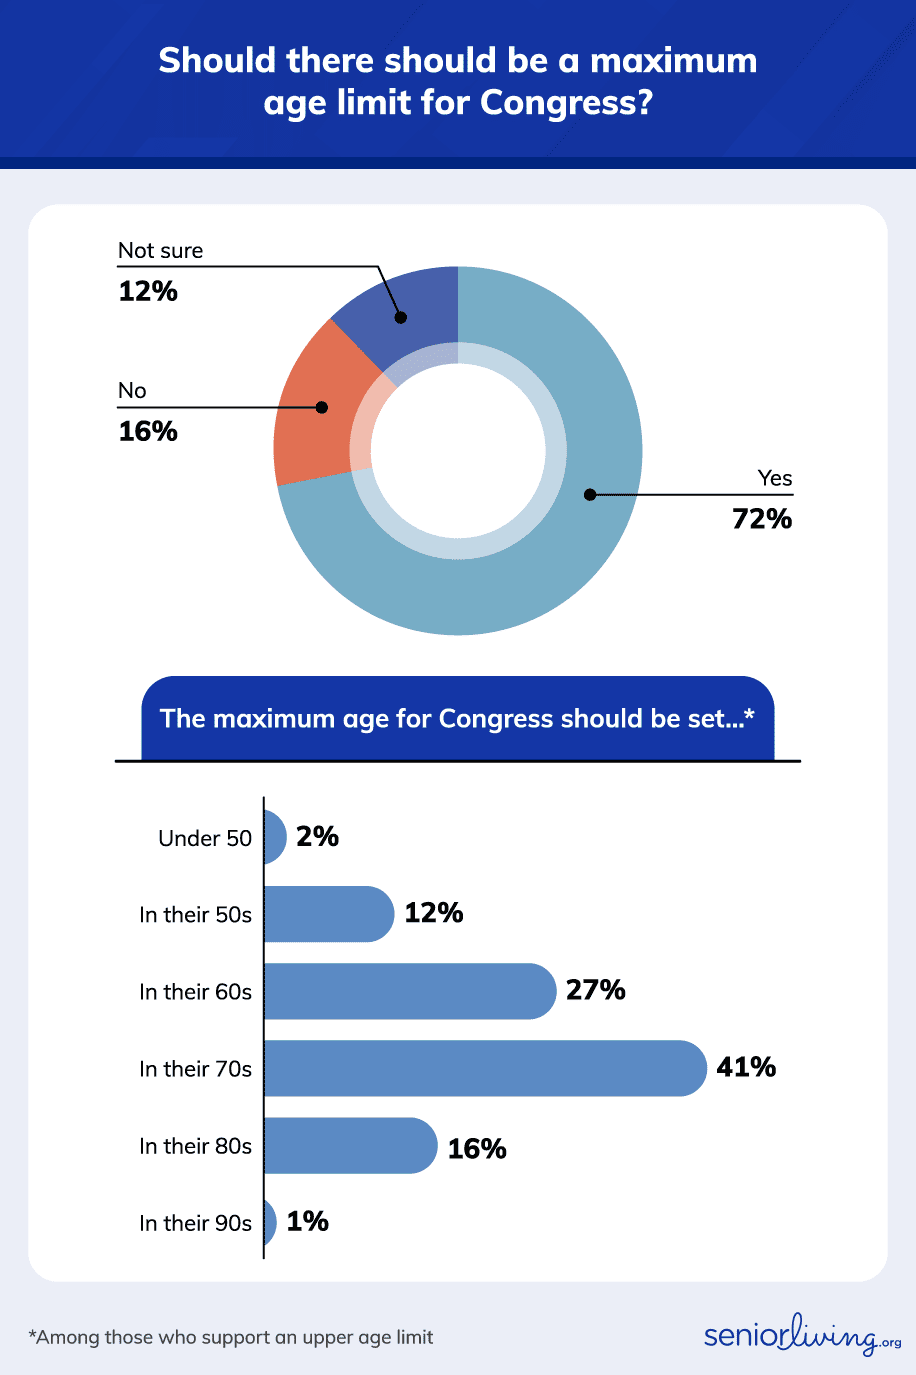 Should there be a maximum age for Congress